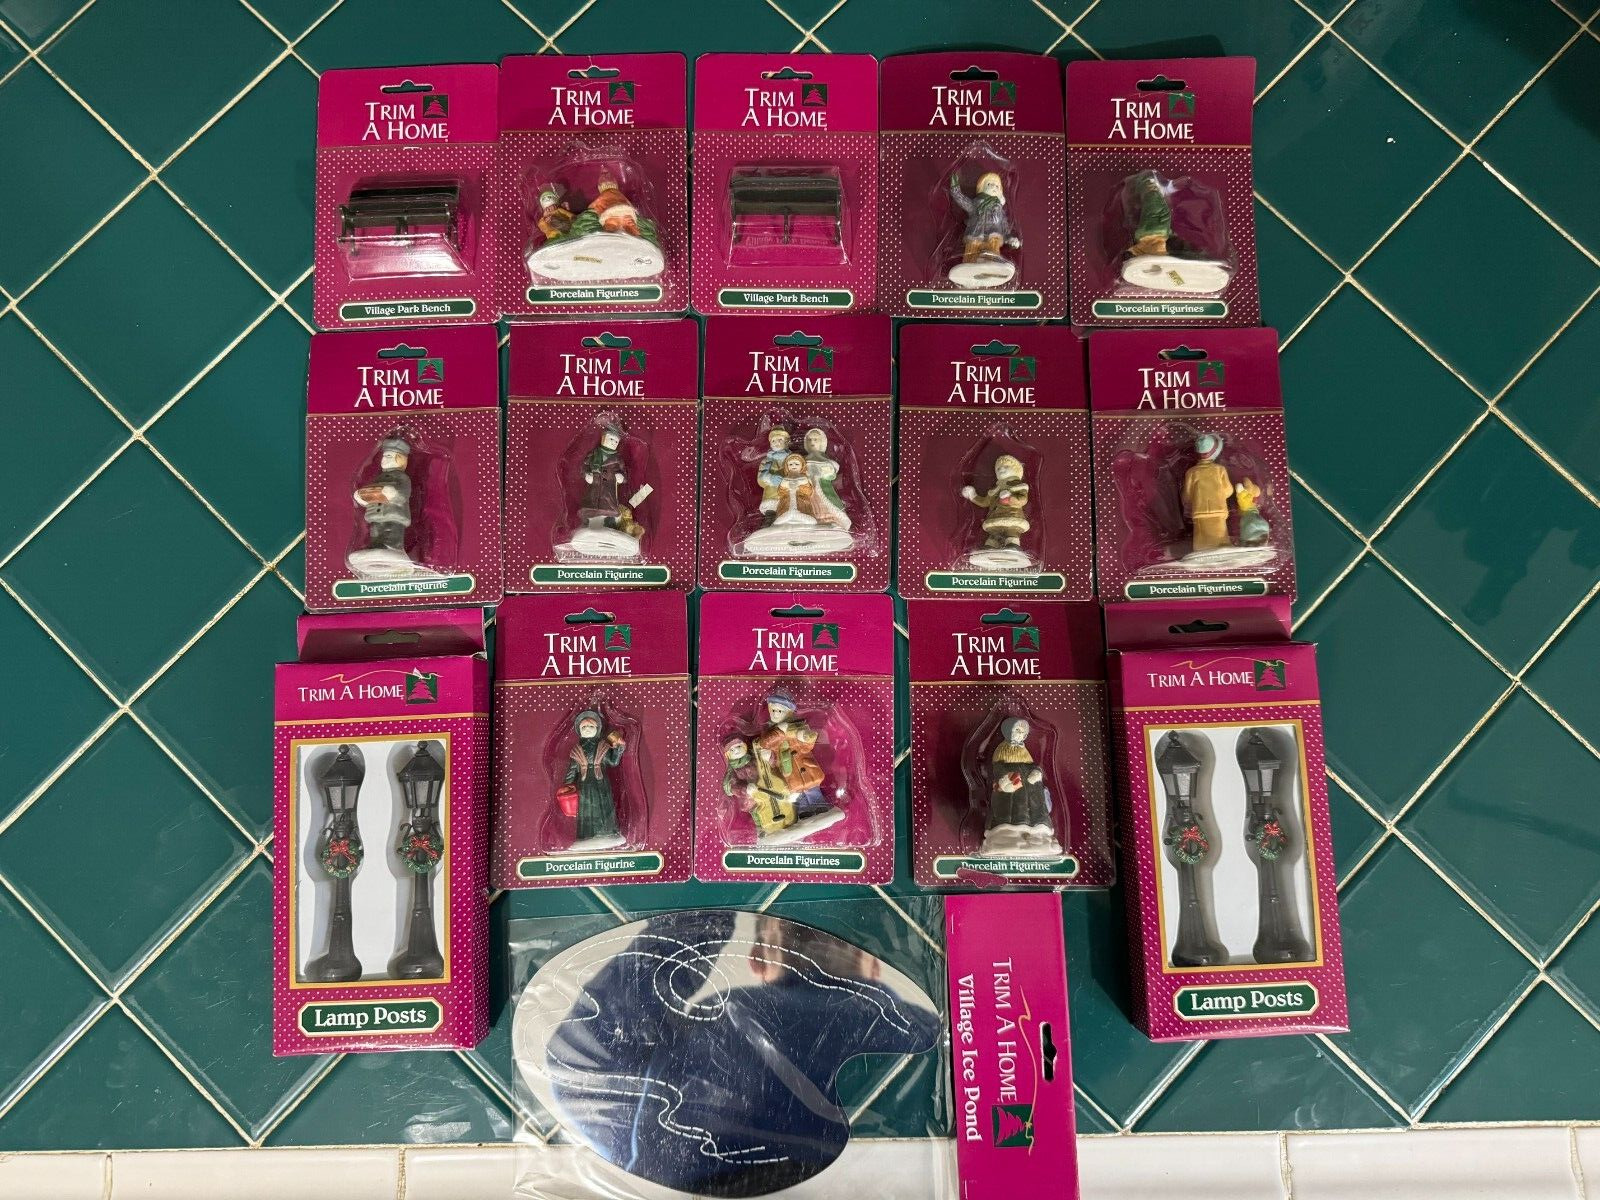 Trim A Home Christmas Village Accessories Lot of 16 with Pond and Light Poles